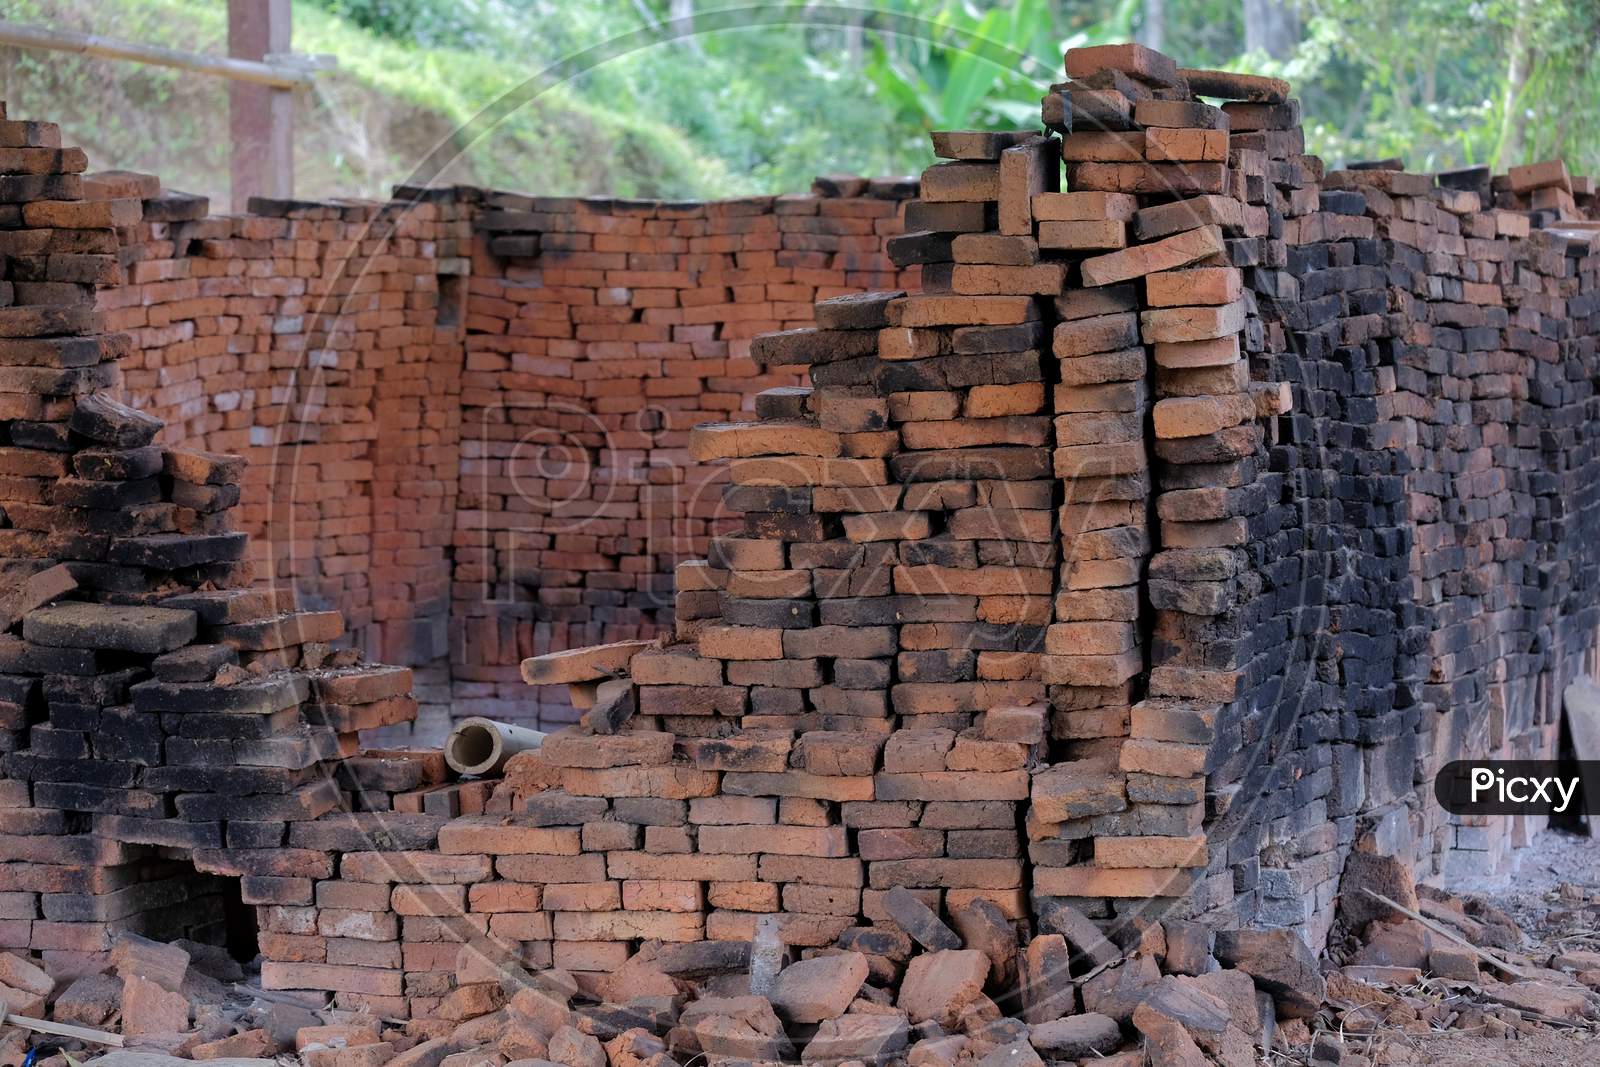 Red bricks where the combustion process